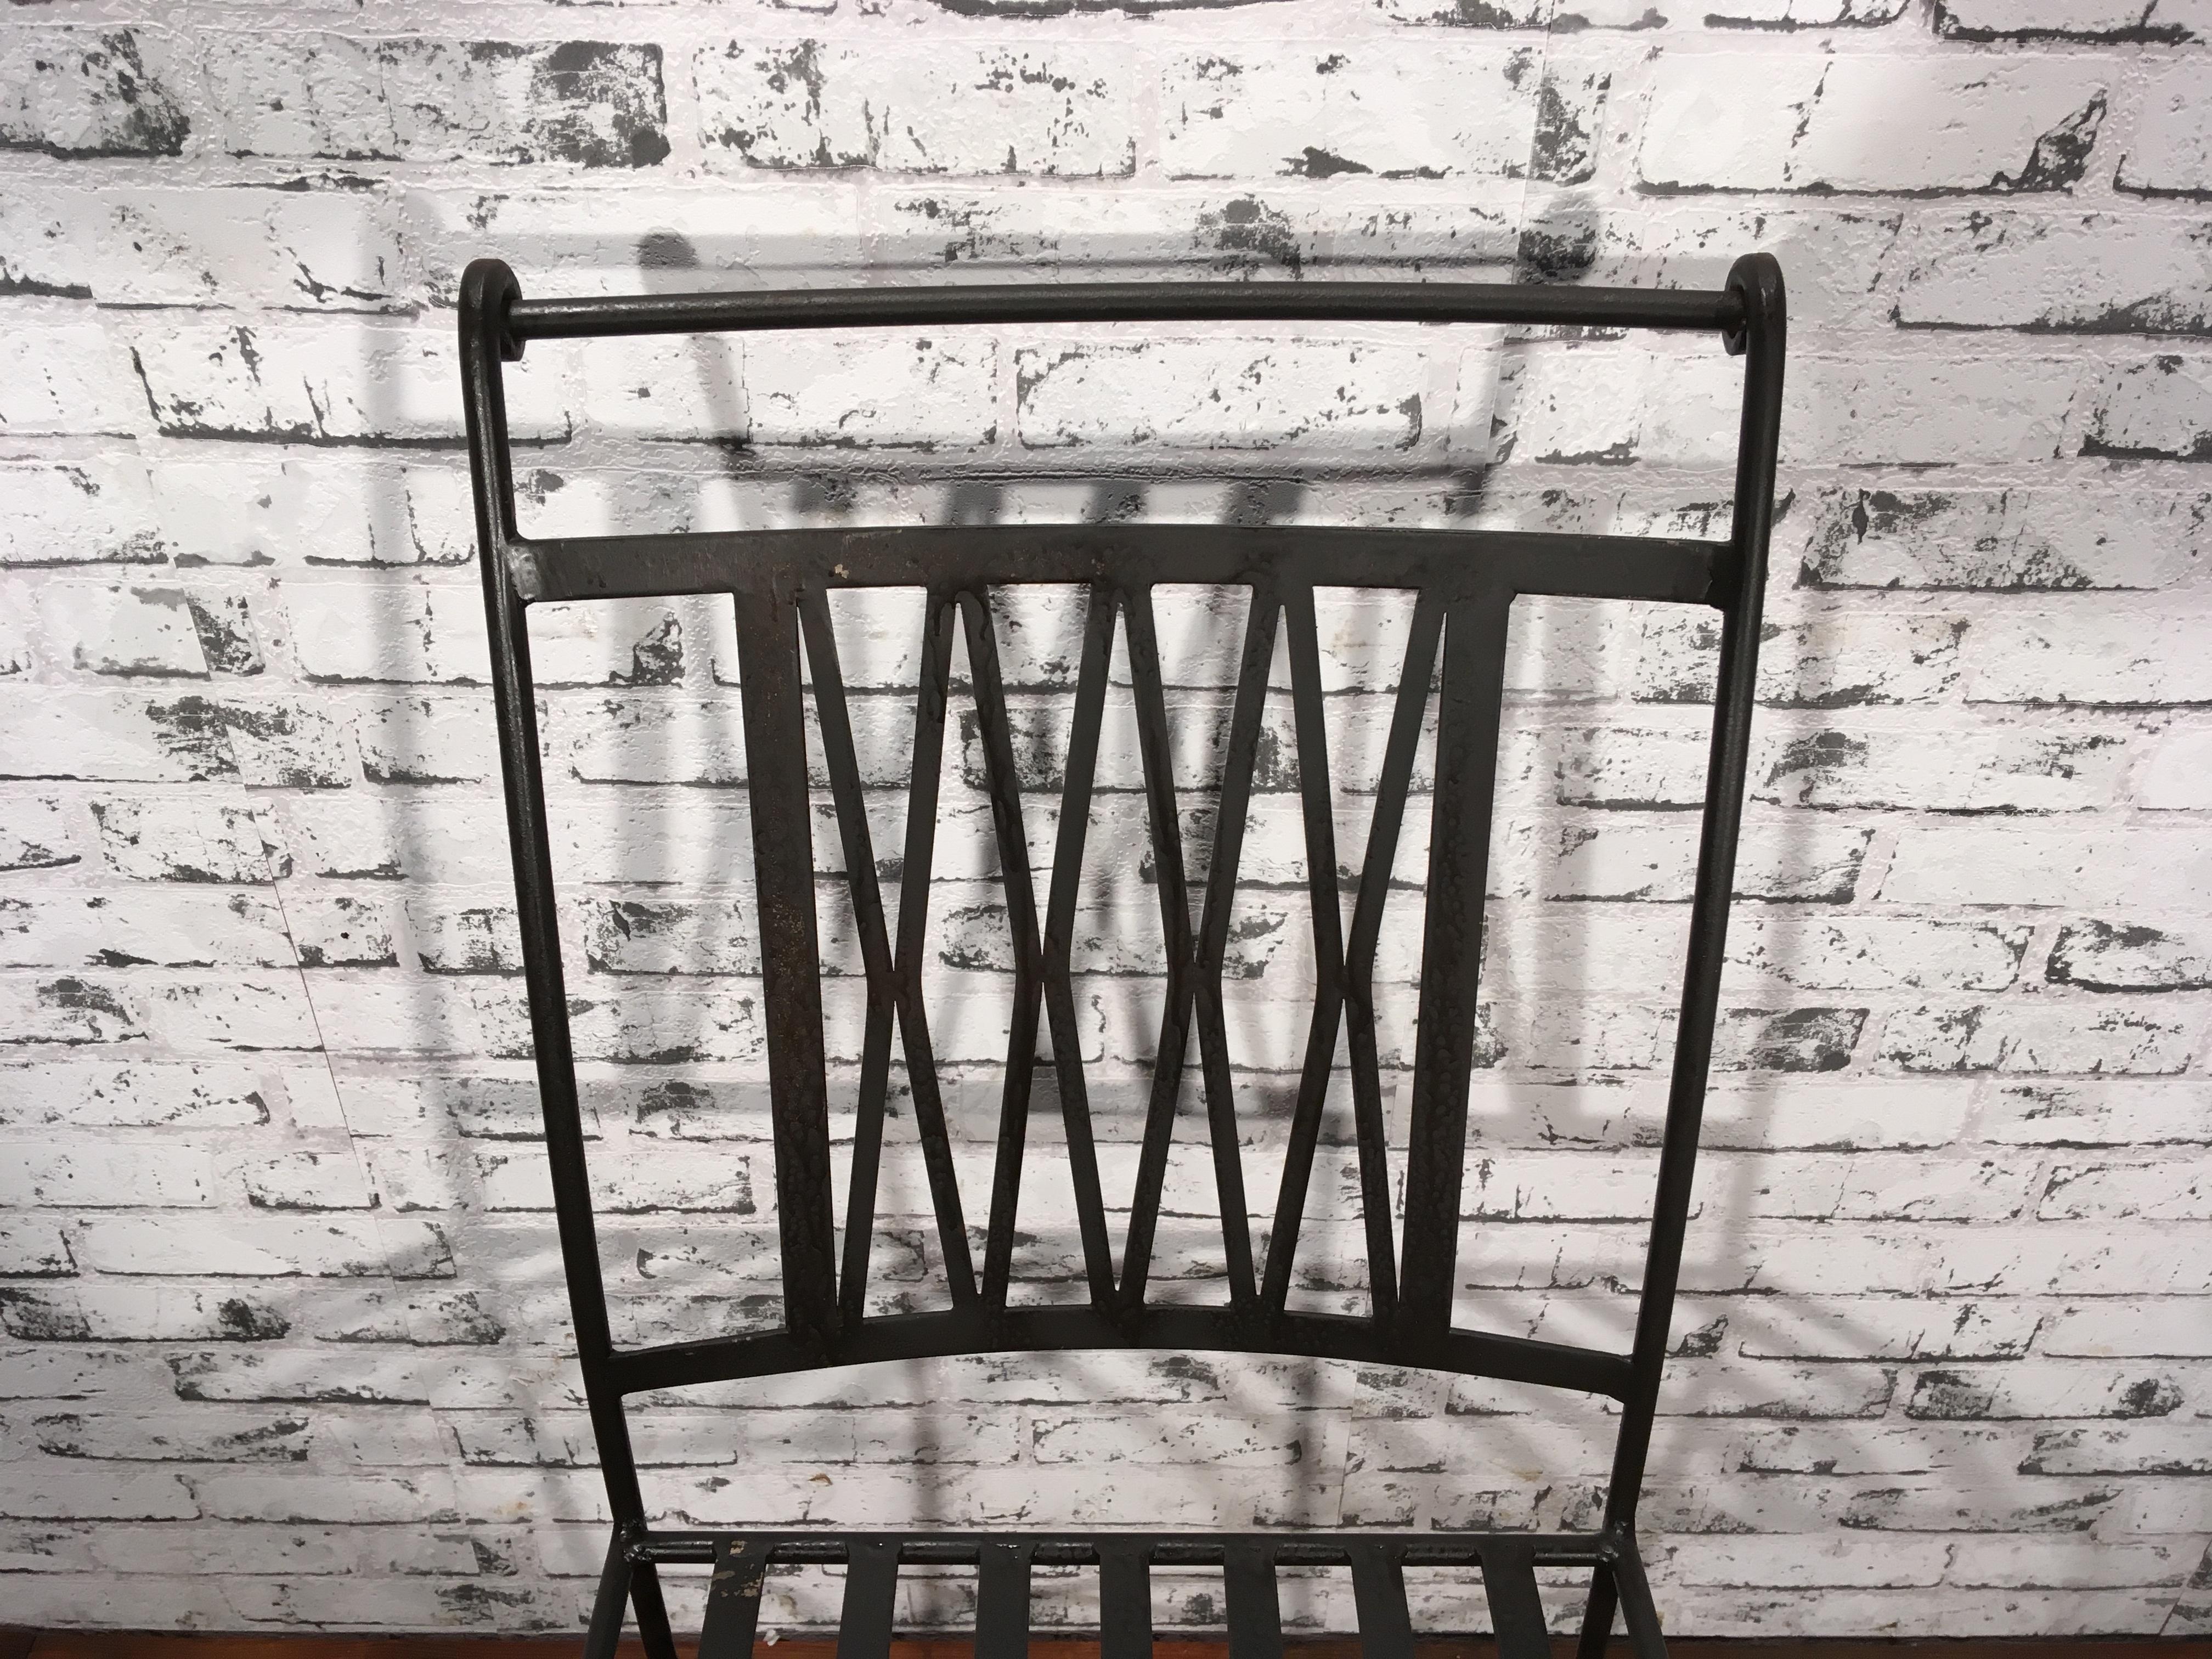 Industrial Vintage Iron Chair, 1930s